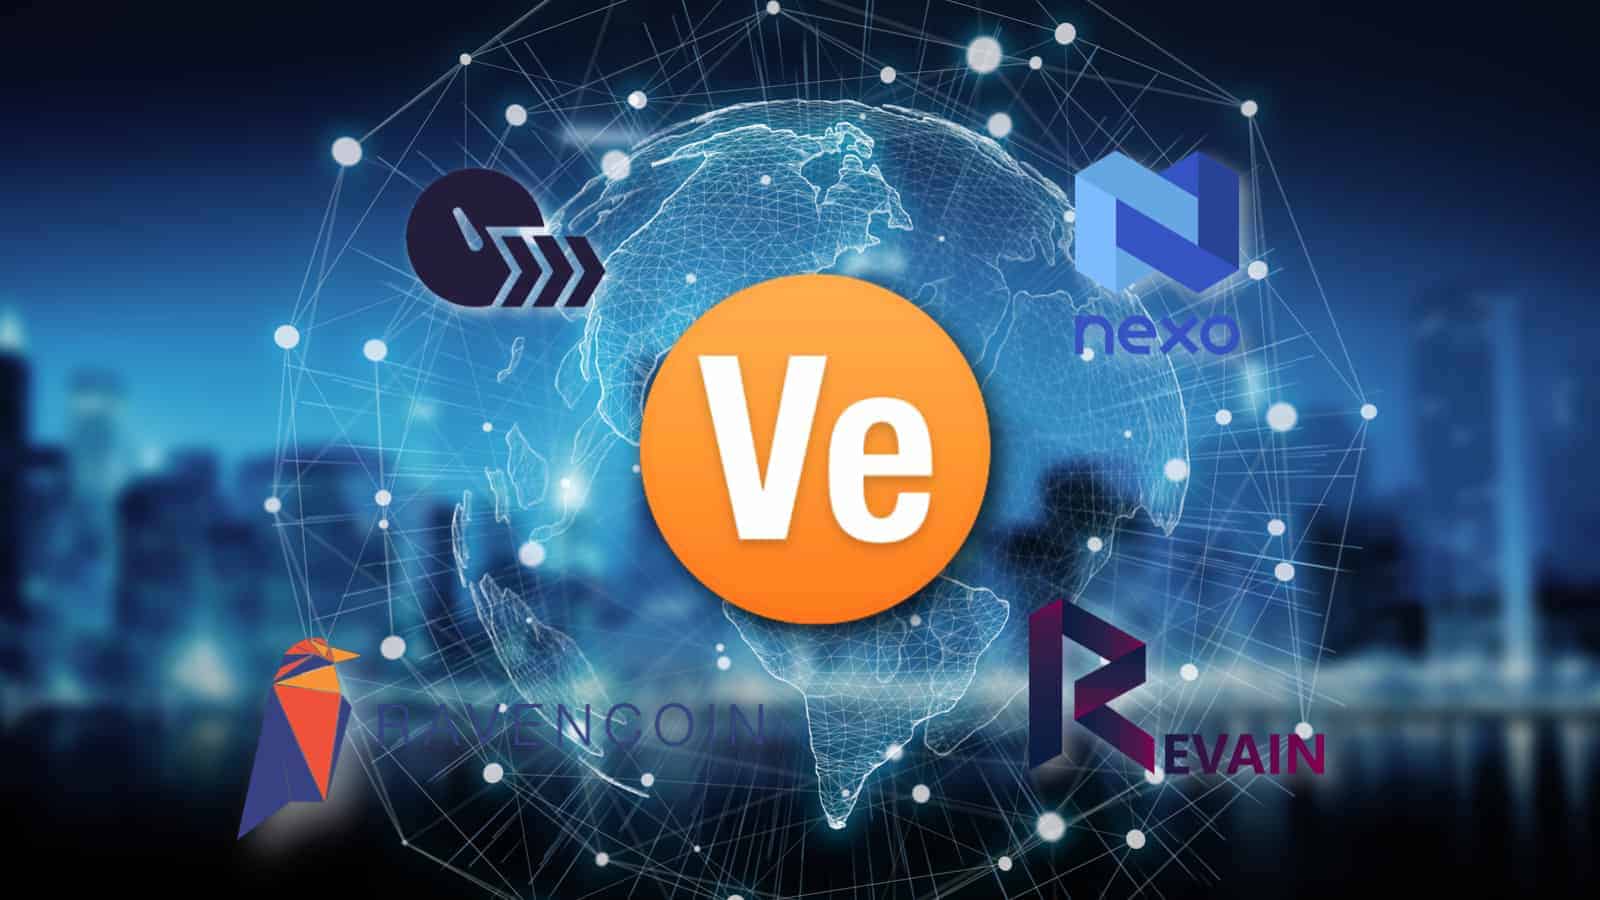 VERI, RVN, NEXO, GO and R: Crypto's Biggest Price Moves of the Week